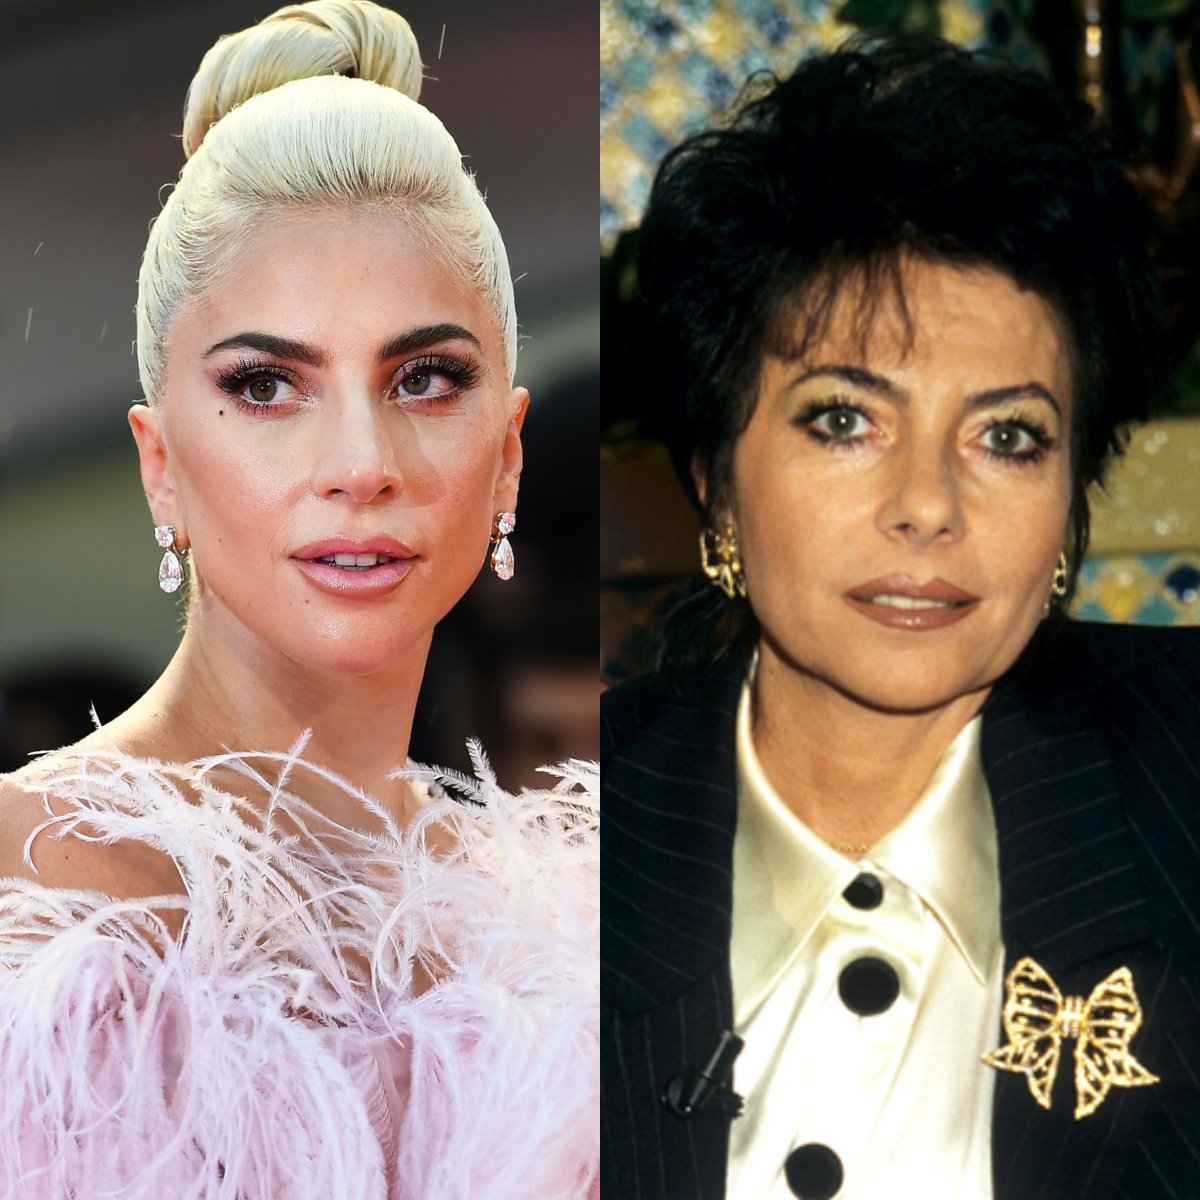 True story of Gaga's Gucci Film character - News and Events - Gaga Daily